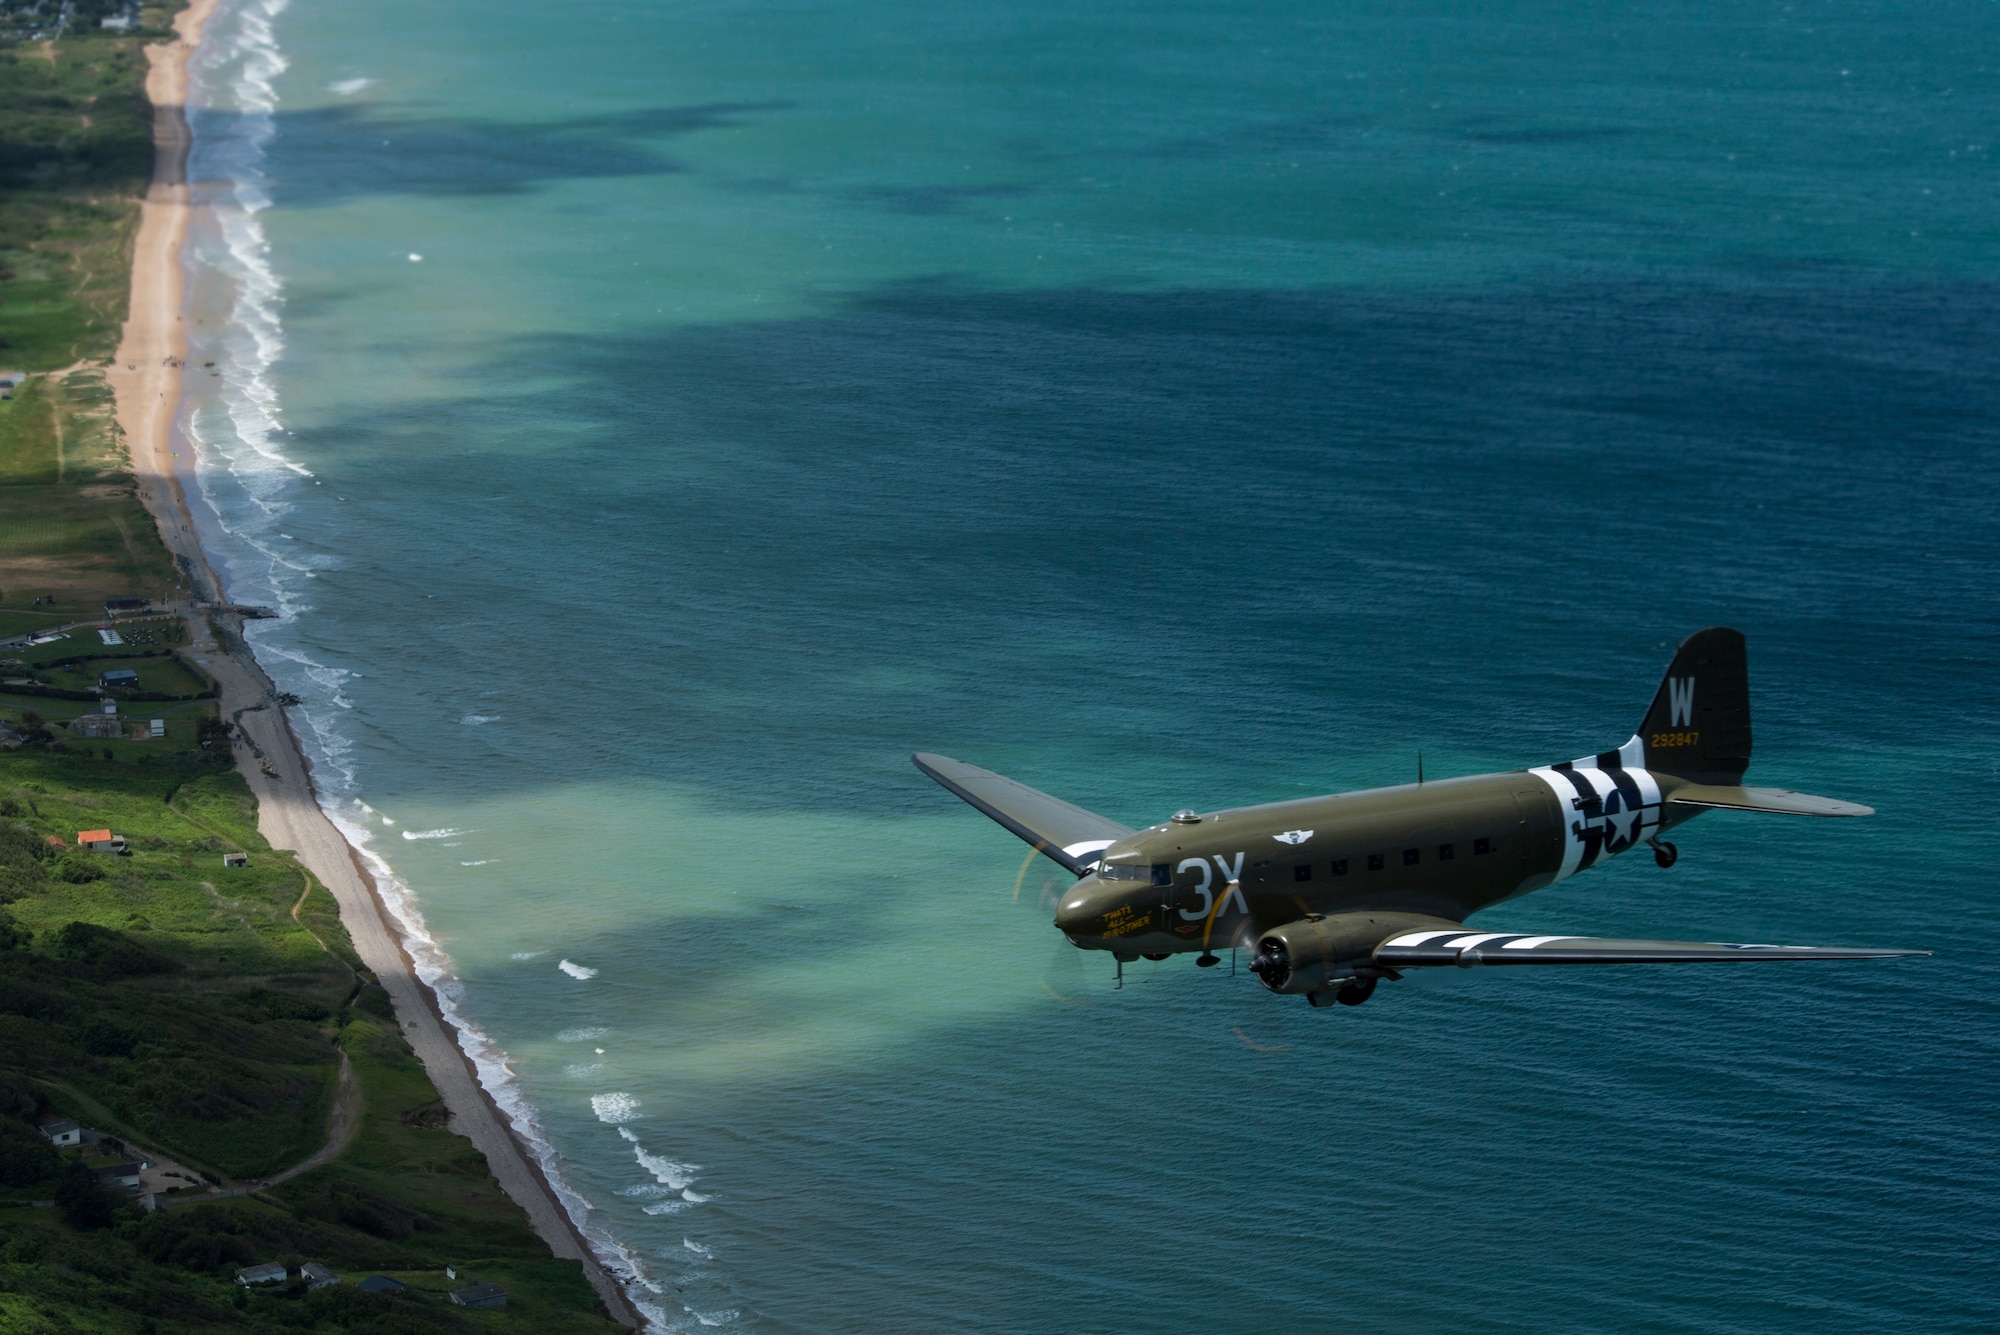 A Douglas C-47 Dakota, nicknamed “That’s All Brother,” flies over the beaches of Normandy, France, June 8, 2019. “That’s All Brother” dropped 101st Airborne troops during the invasion of Normandy, June 6, 1944. (U.S. Air Force photo by Senior Airman Devin M. Rumbaugh)